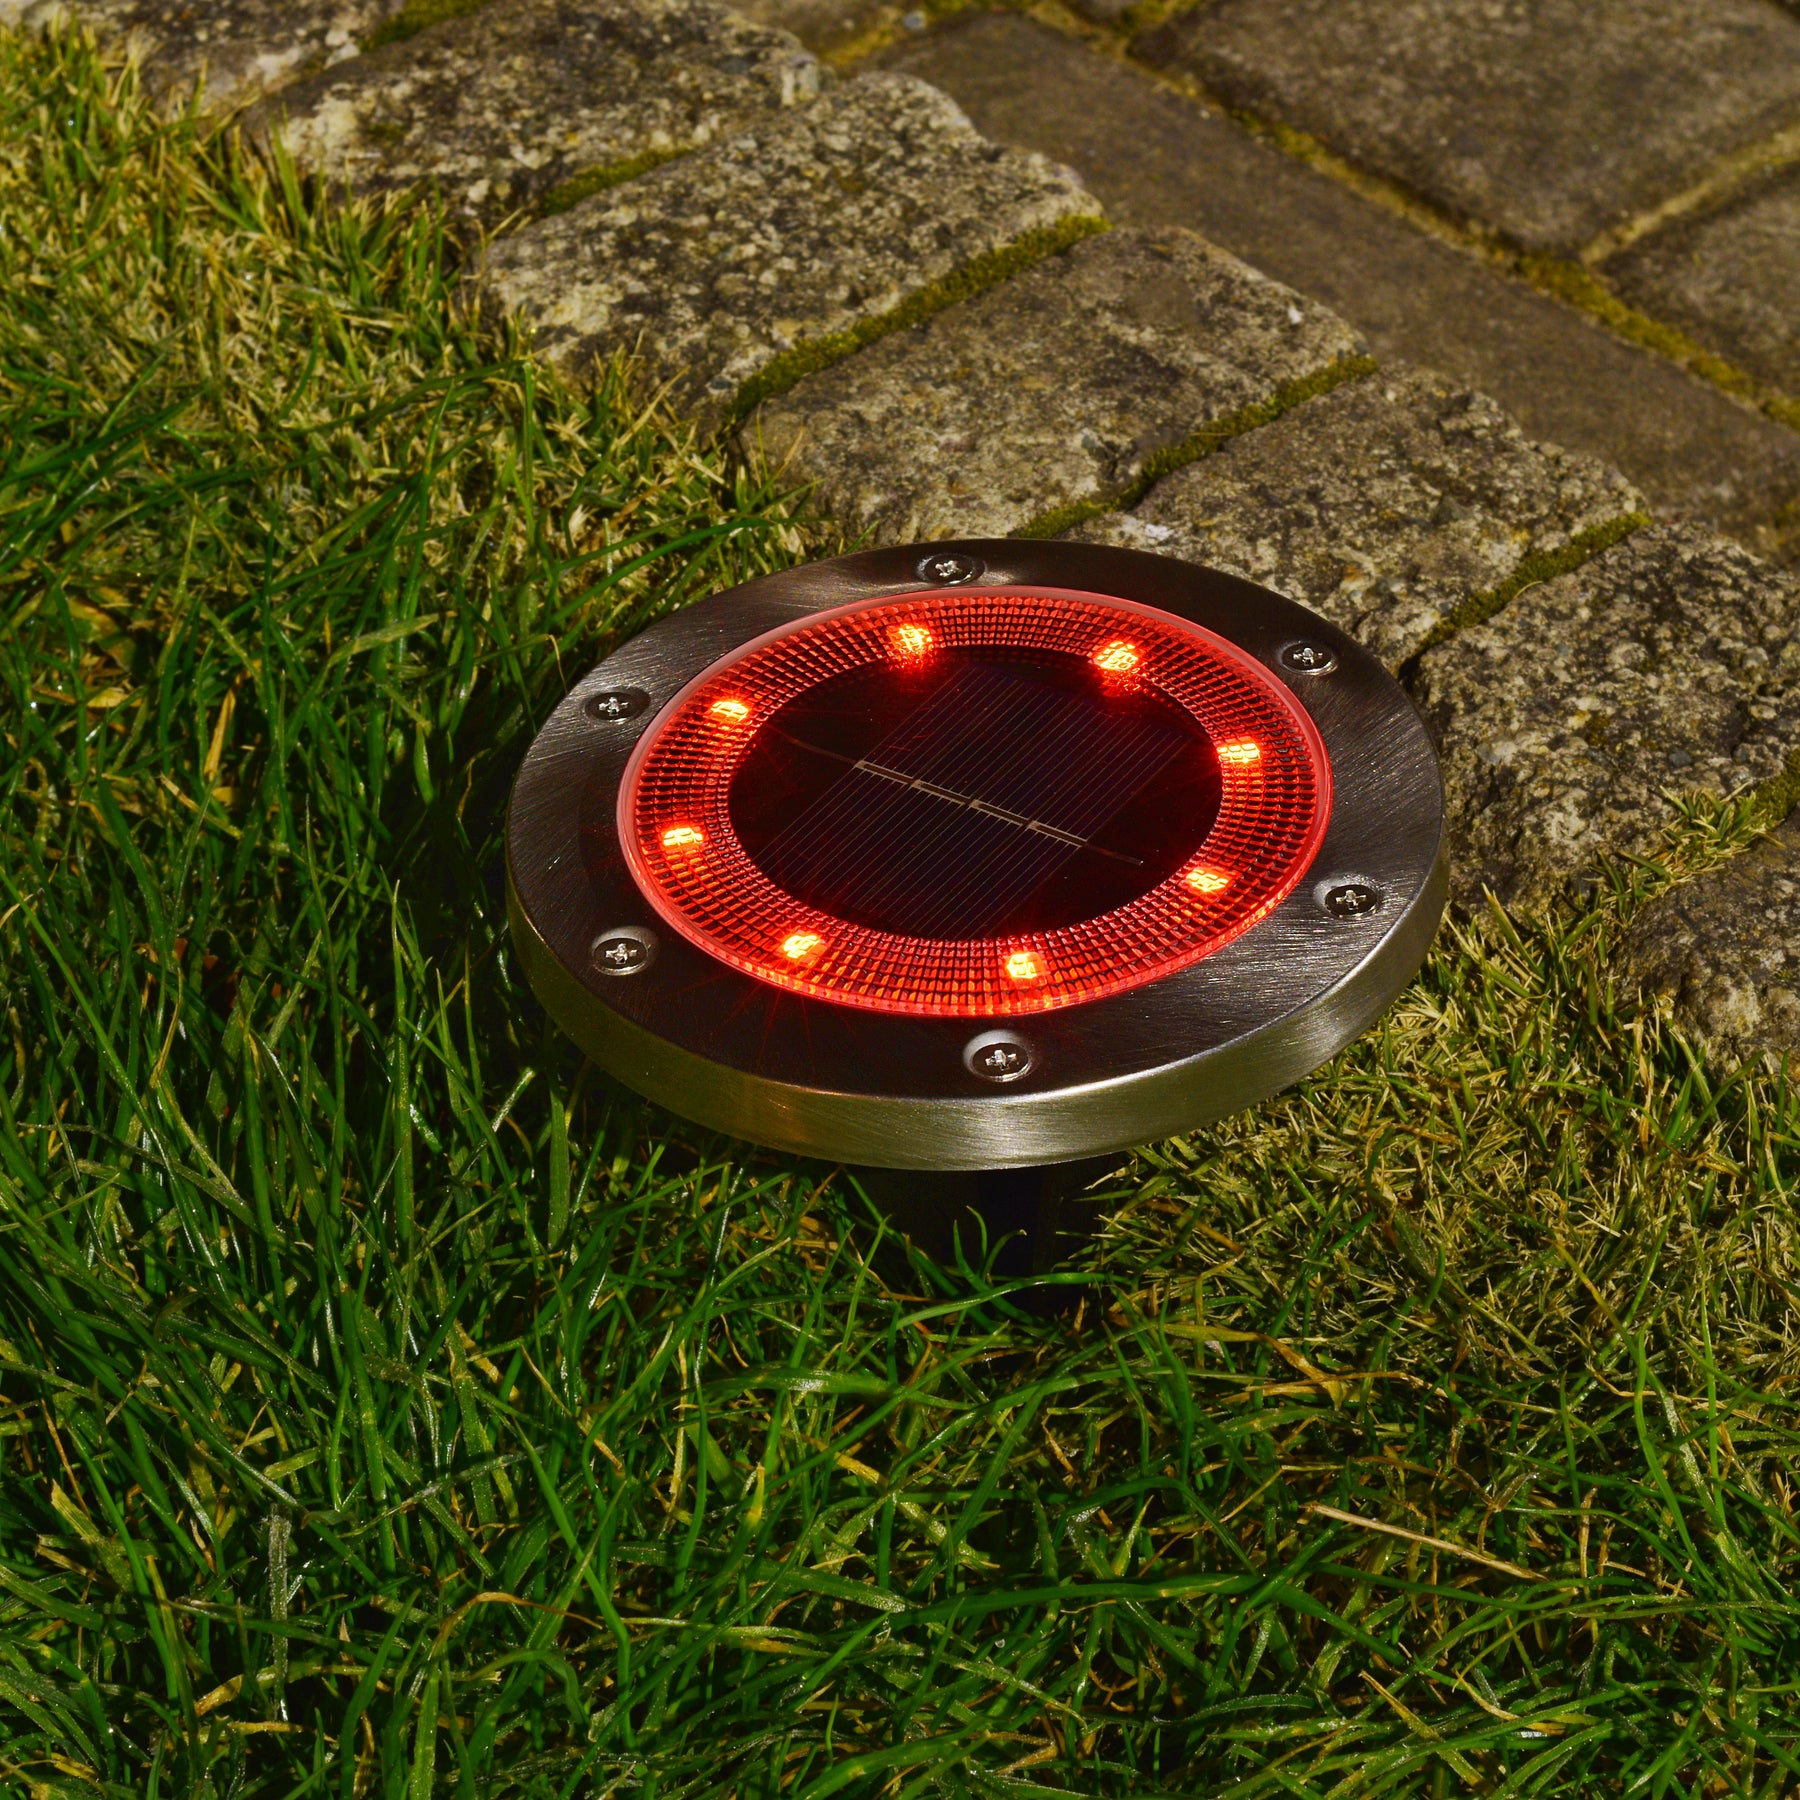 Bliss Outdoors Solar Powered LED Metal Disc Pathway light in the ground lighting up red.